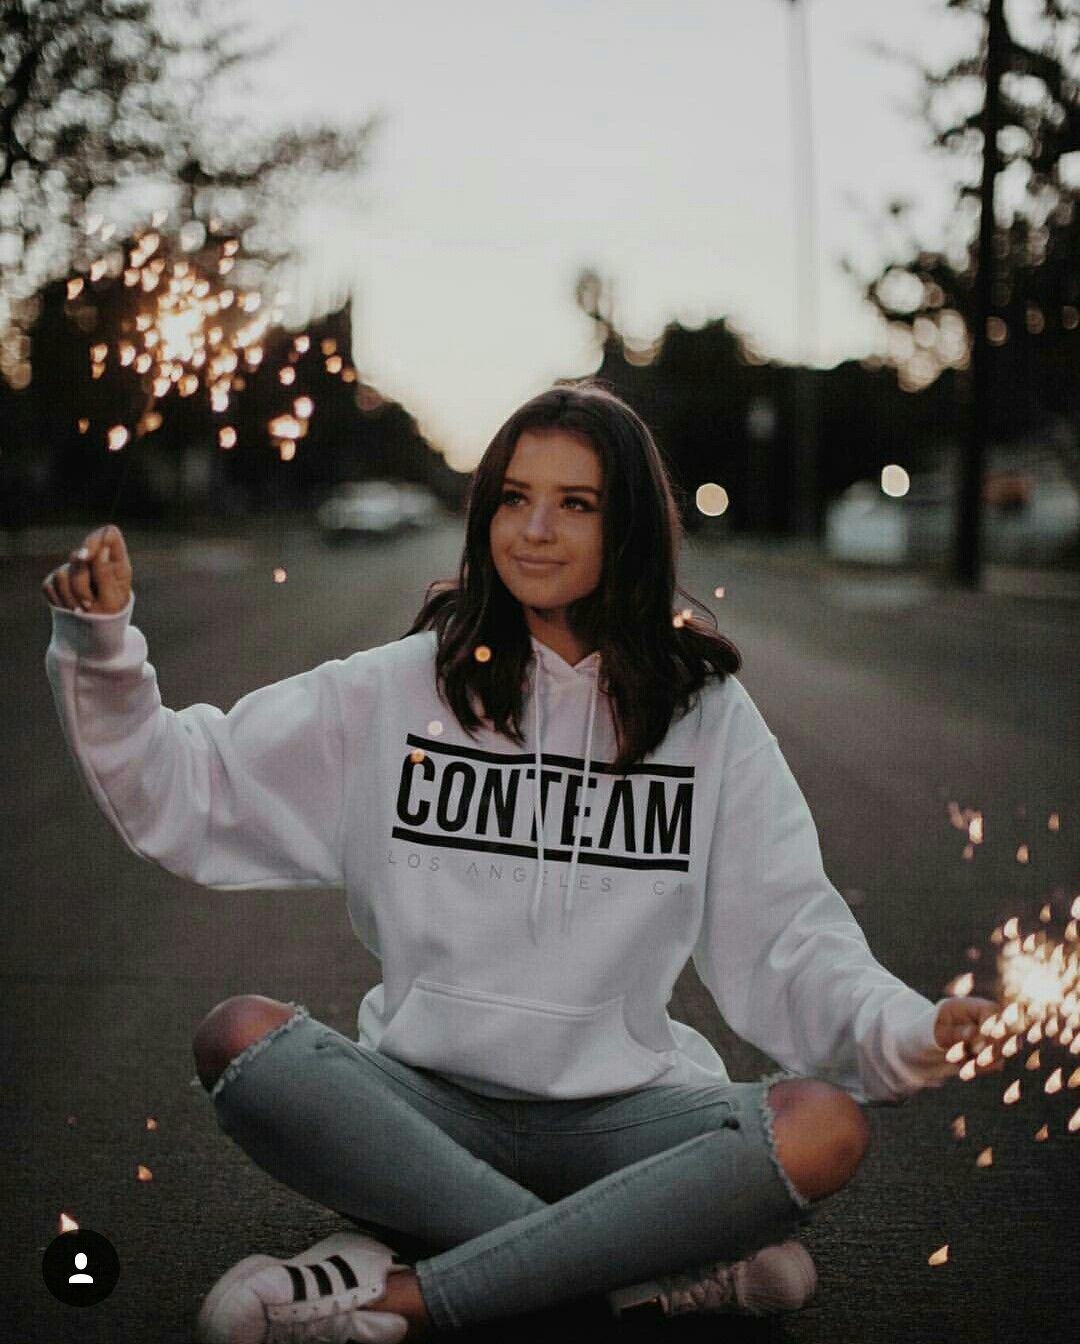 Jess Conte Wiki, Bio, Family, Career, Net Worth, Education, Life, Facts